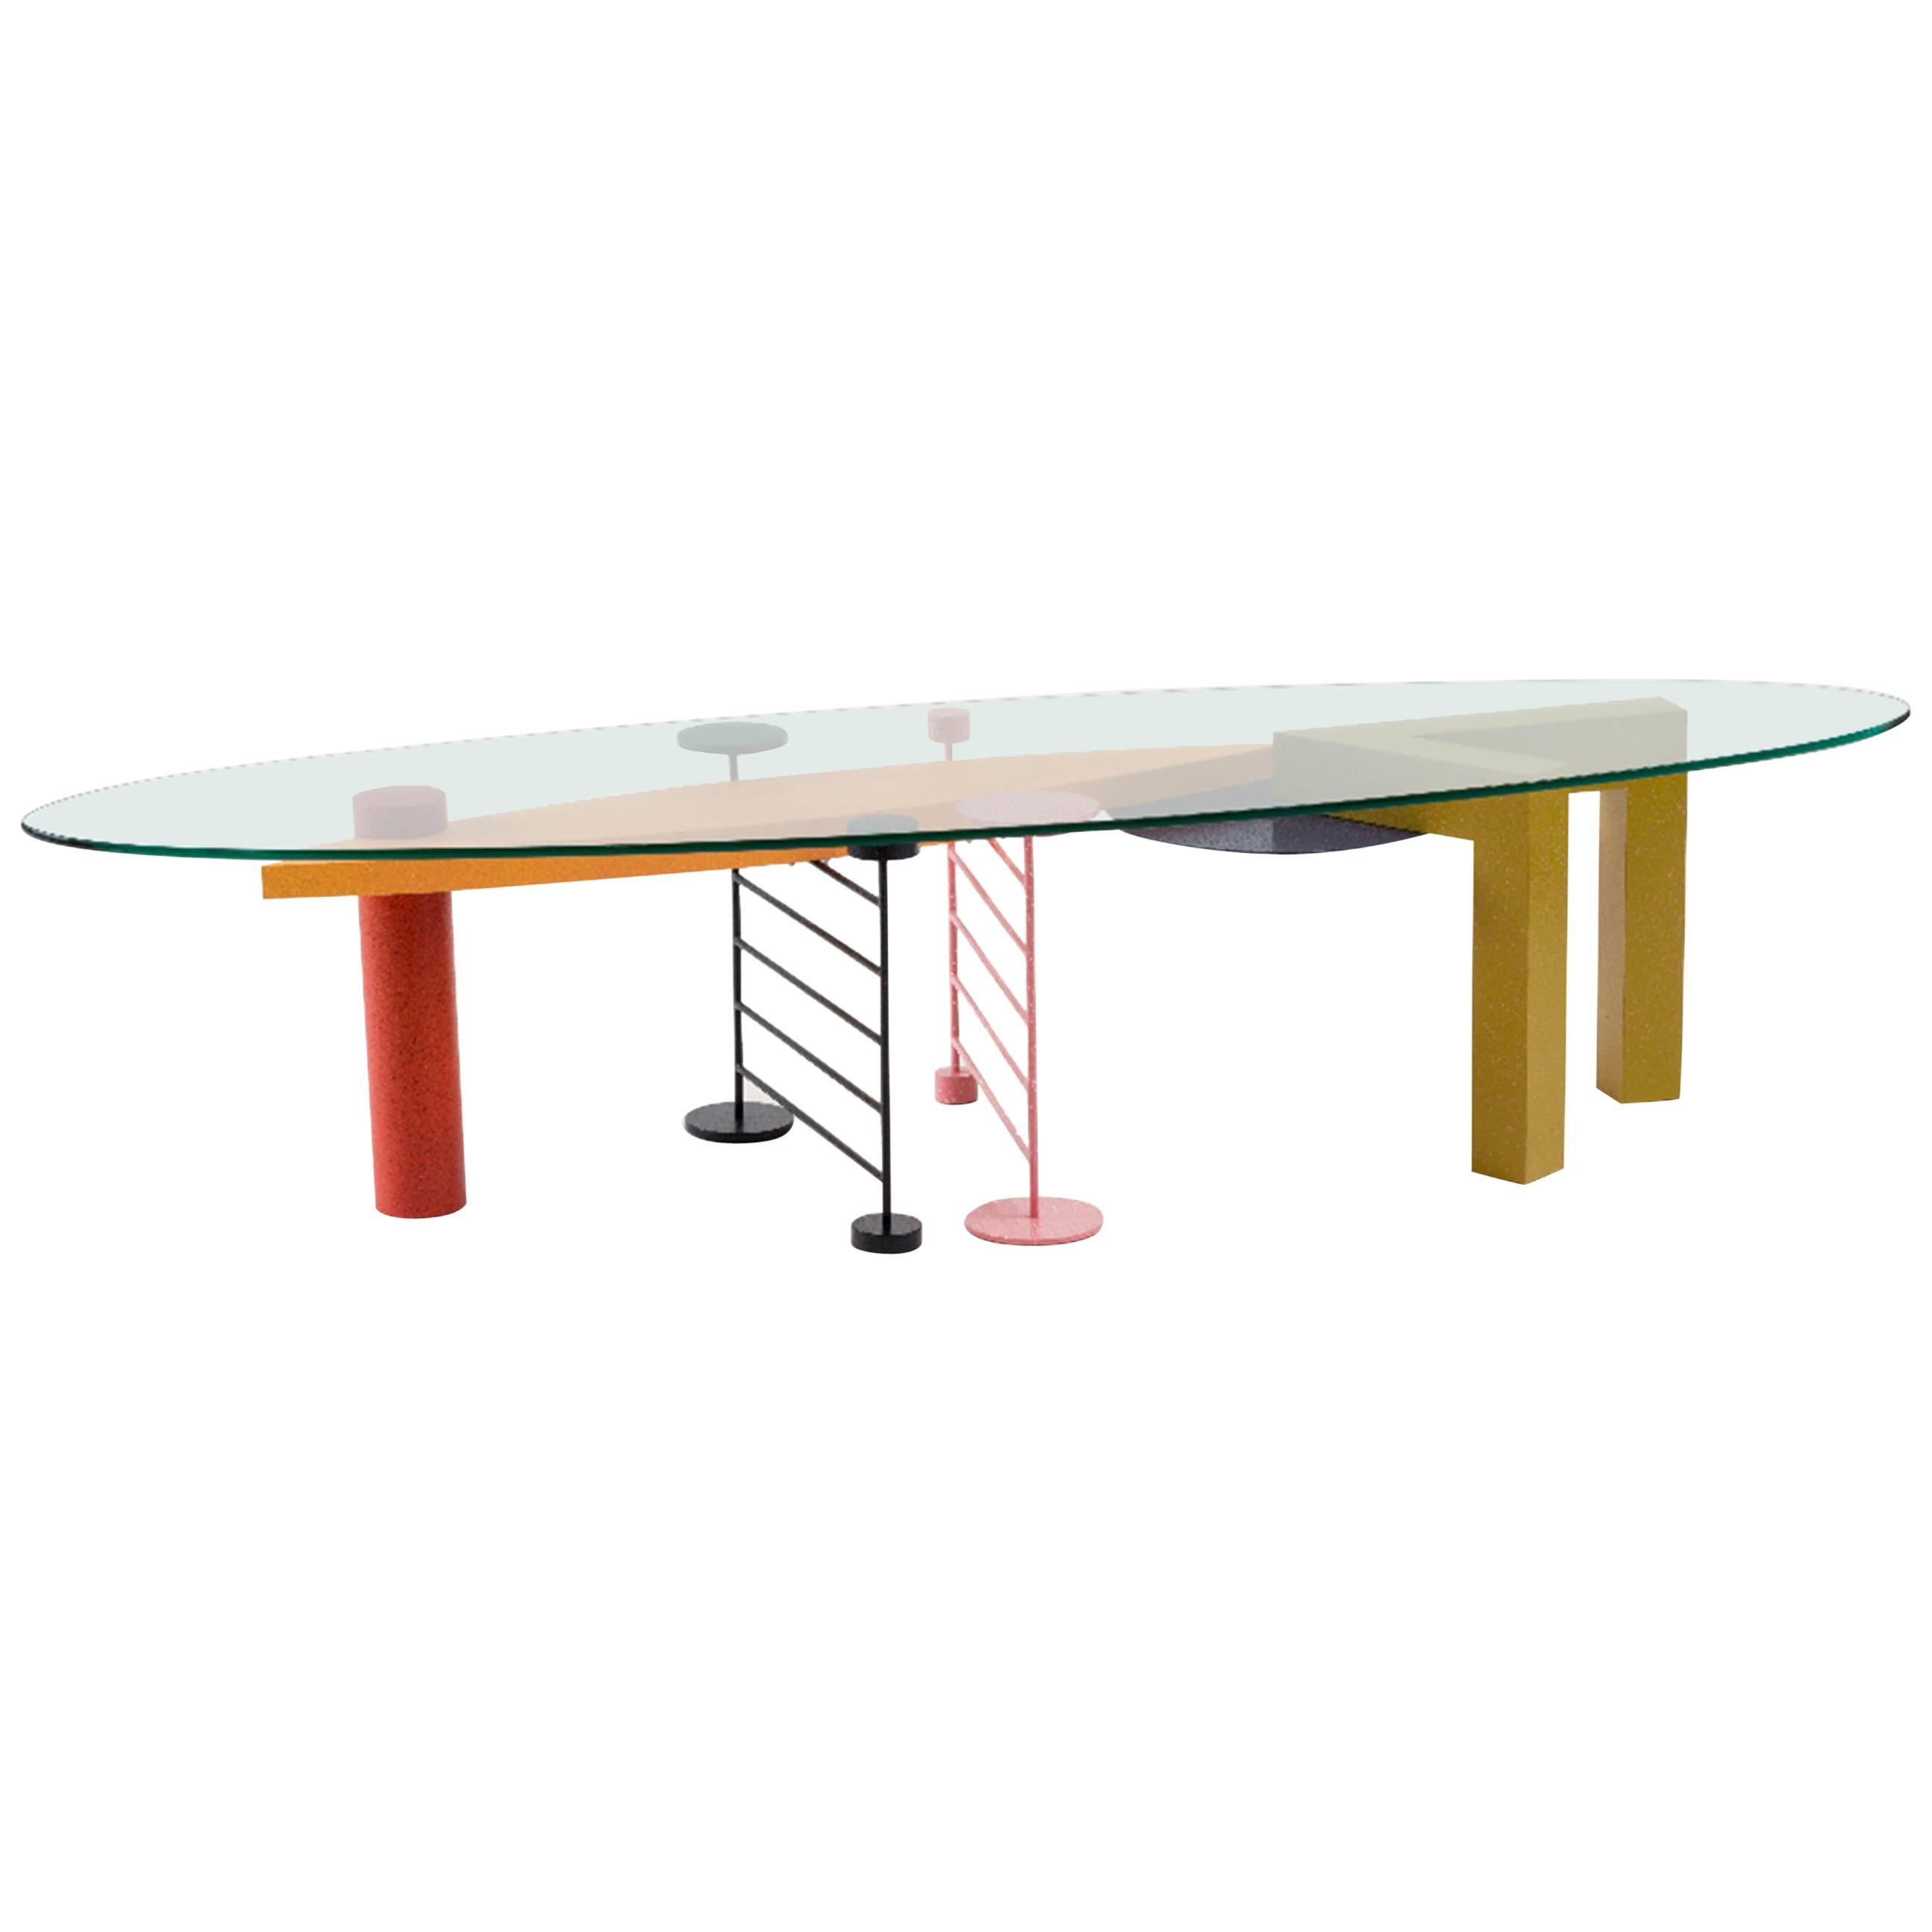 'Don't Jump until You Get to the Style' Coffee Table by Peter Shire, 1989 For Sale